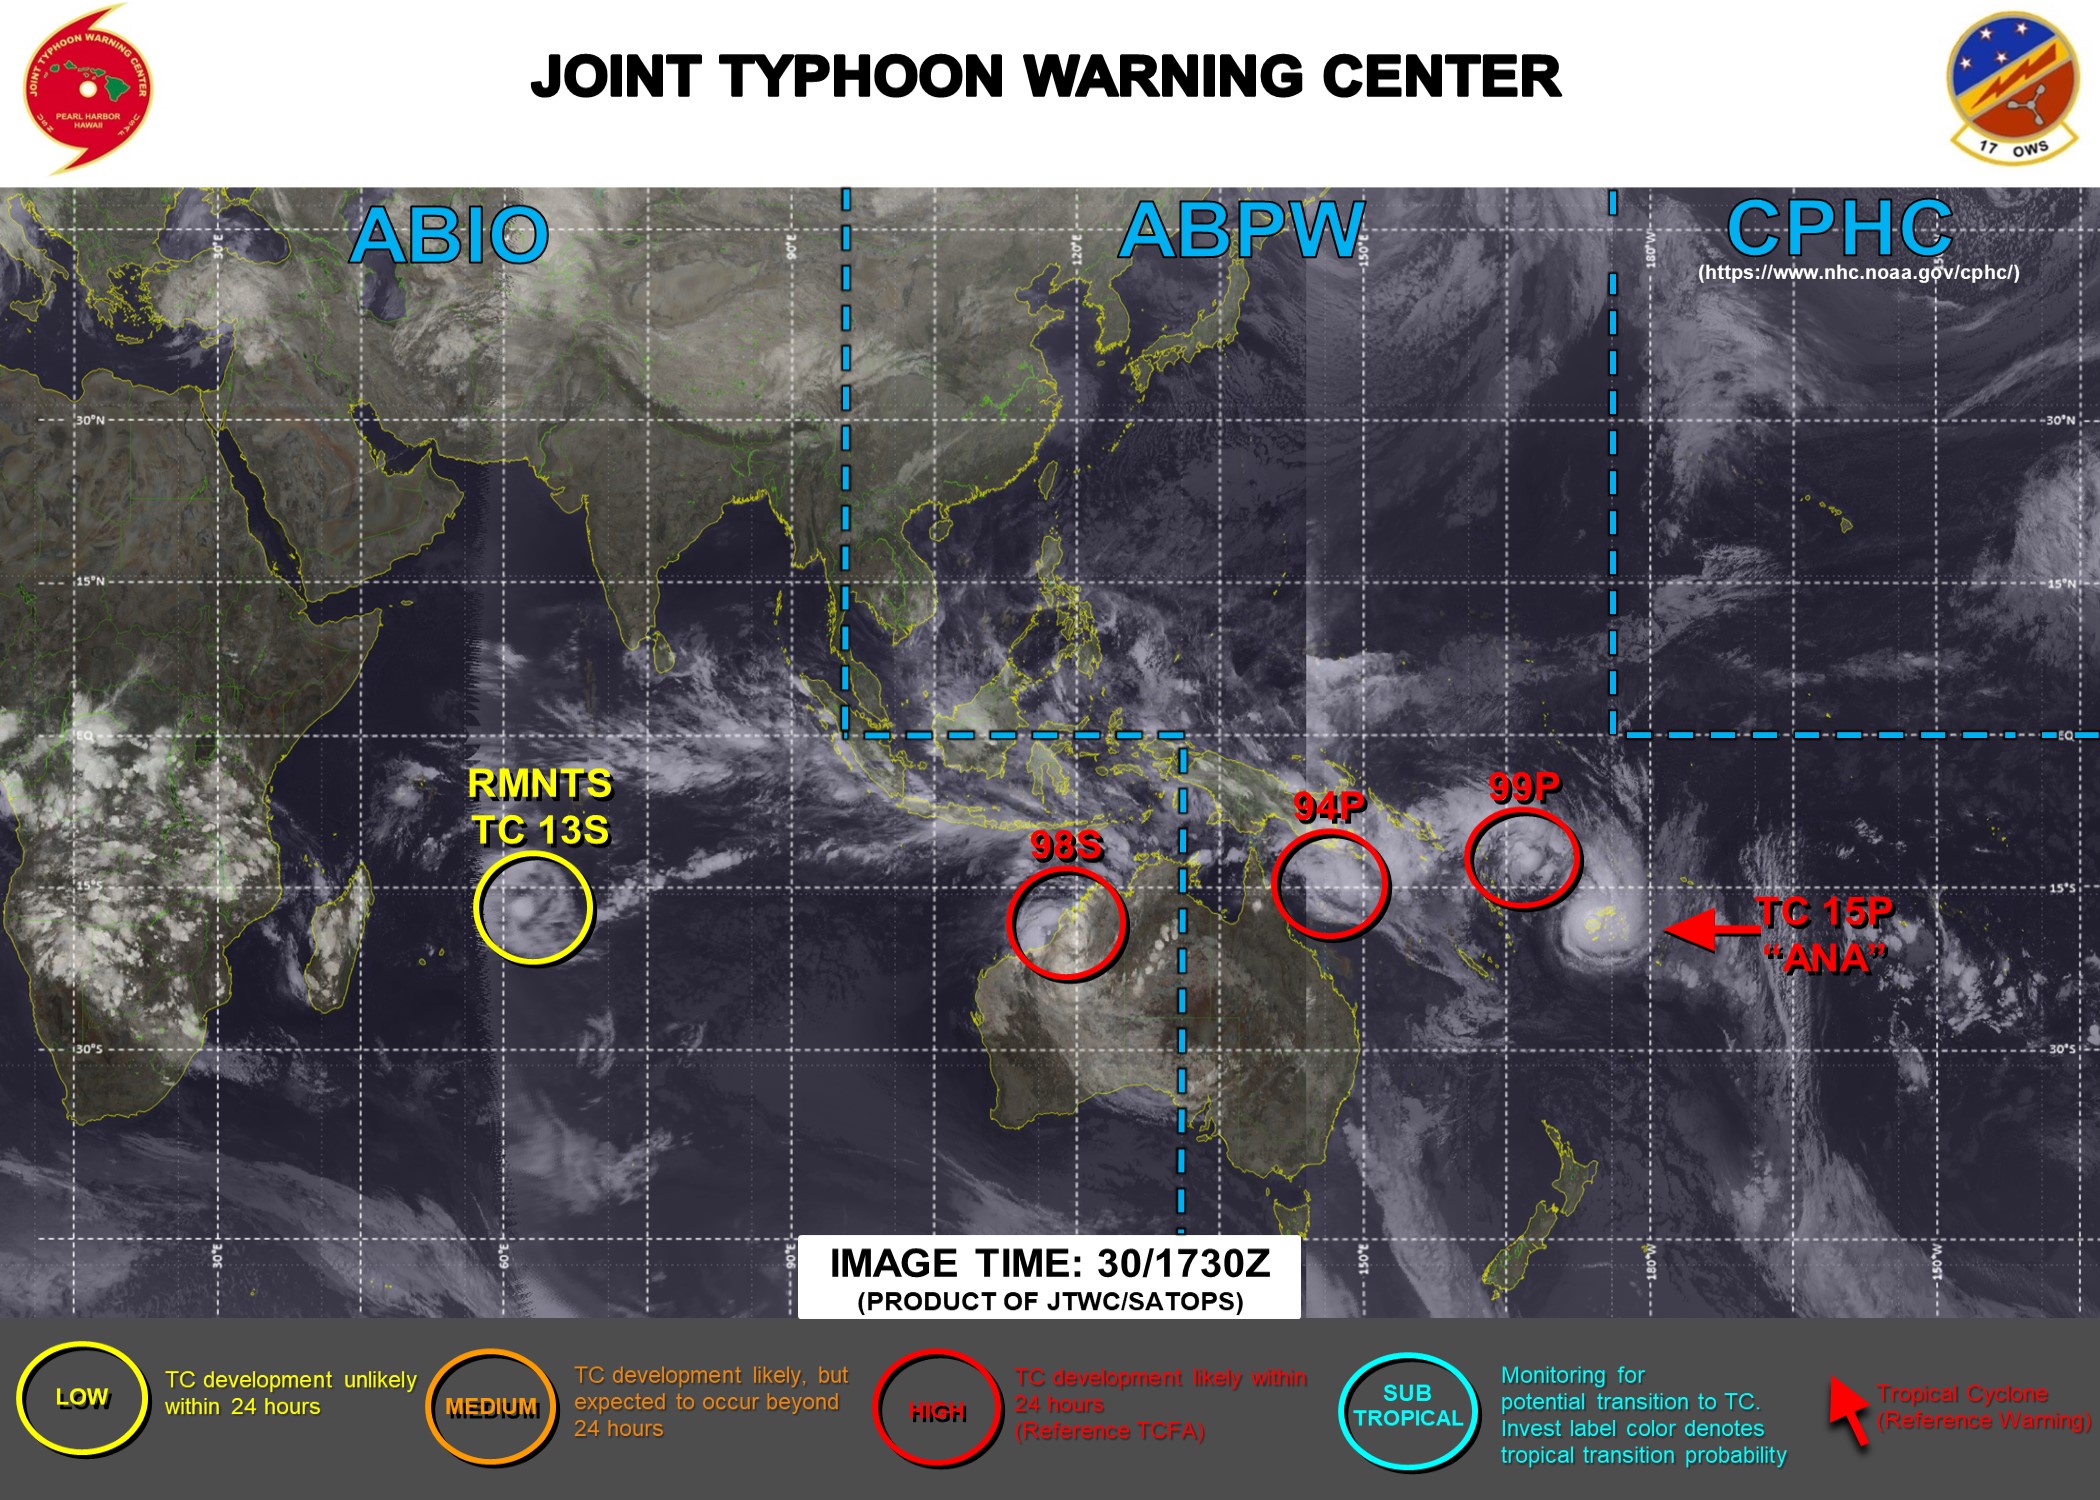 JTWC HAS BEEN ISSUING 6HOURLY WARNINGS ON 15P(ANA). 3HOURLY SATELLITE BULLETINS ARE PROVIDED FOR 15P, INVEST 94P, INVEST 99P AND INVEST 98S.